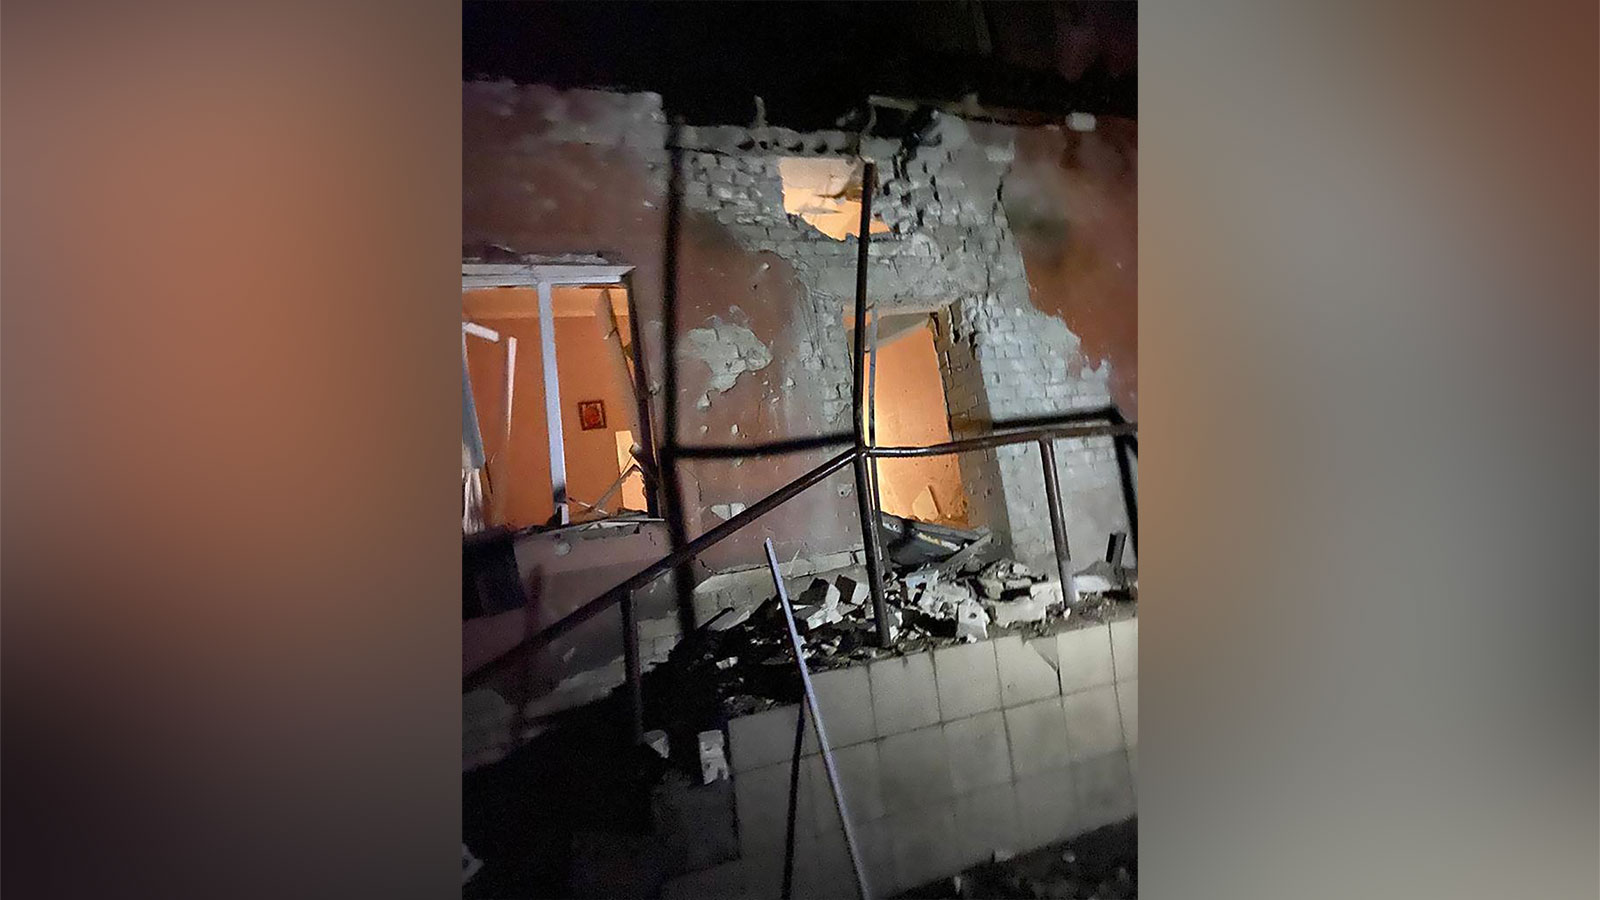 Kherson hospital hit by Russian shelling, Ukrainian official says